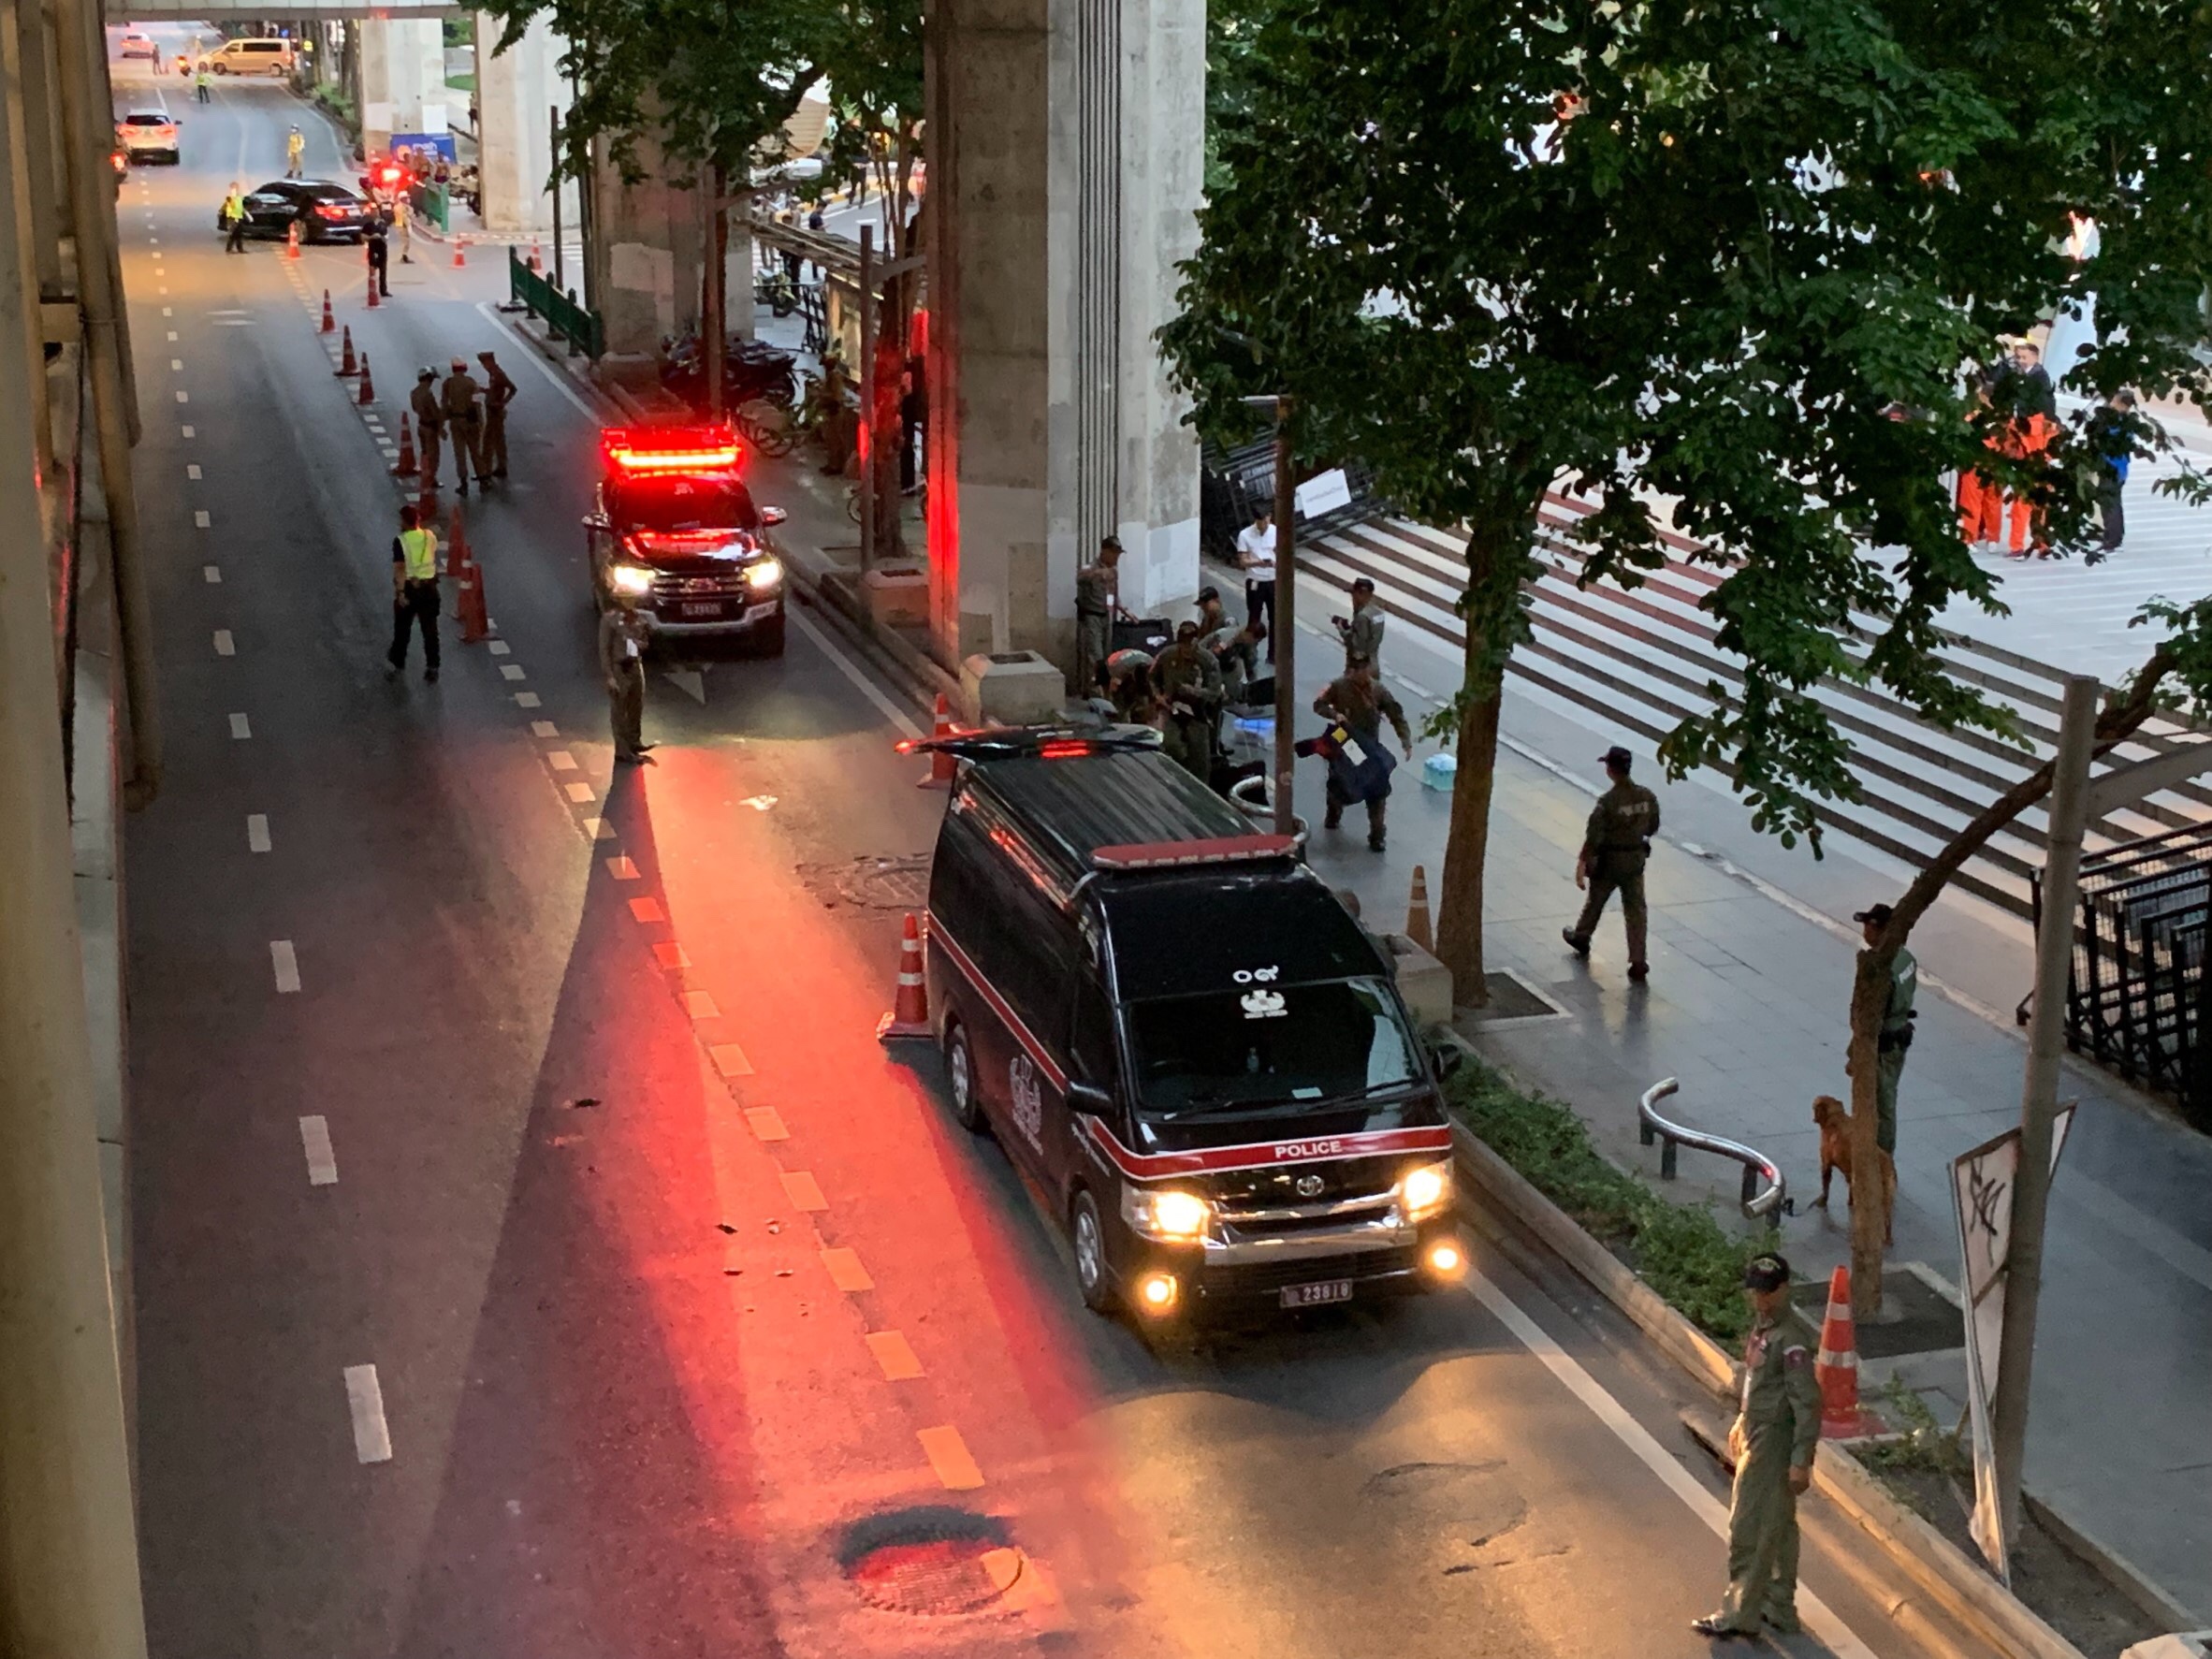 Explosive ordnance disposal (EOD) officials at Ratchaprasong Intersection on the night of August 2, 2019.